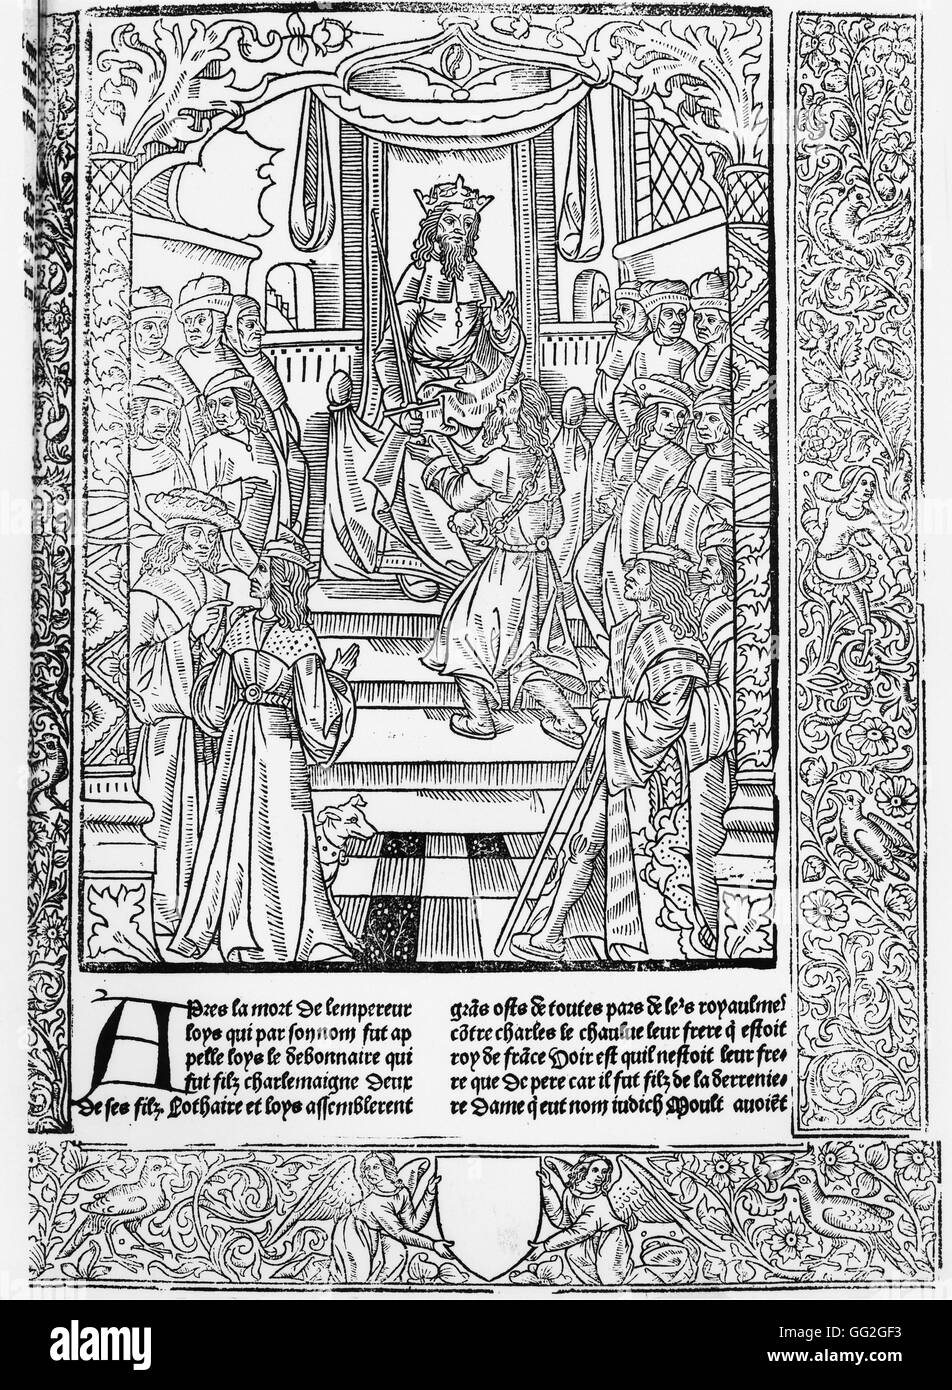 Great Chronicles of France Louis the Pious (also called Louis le Debonnaire), son of Charlemagne, succeeds to the throne in 814.  Woodcut from a 15th century edition of the Great Chronicles of France, published by Antoine Verard. Paris, Bibliothèque Natio Stock Photo